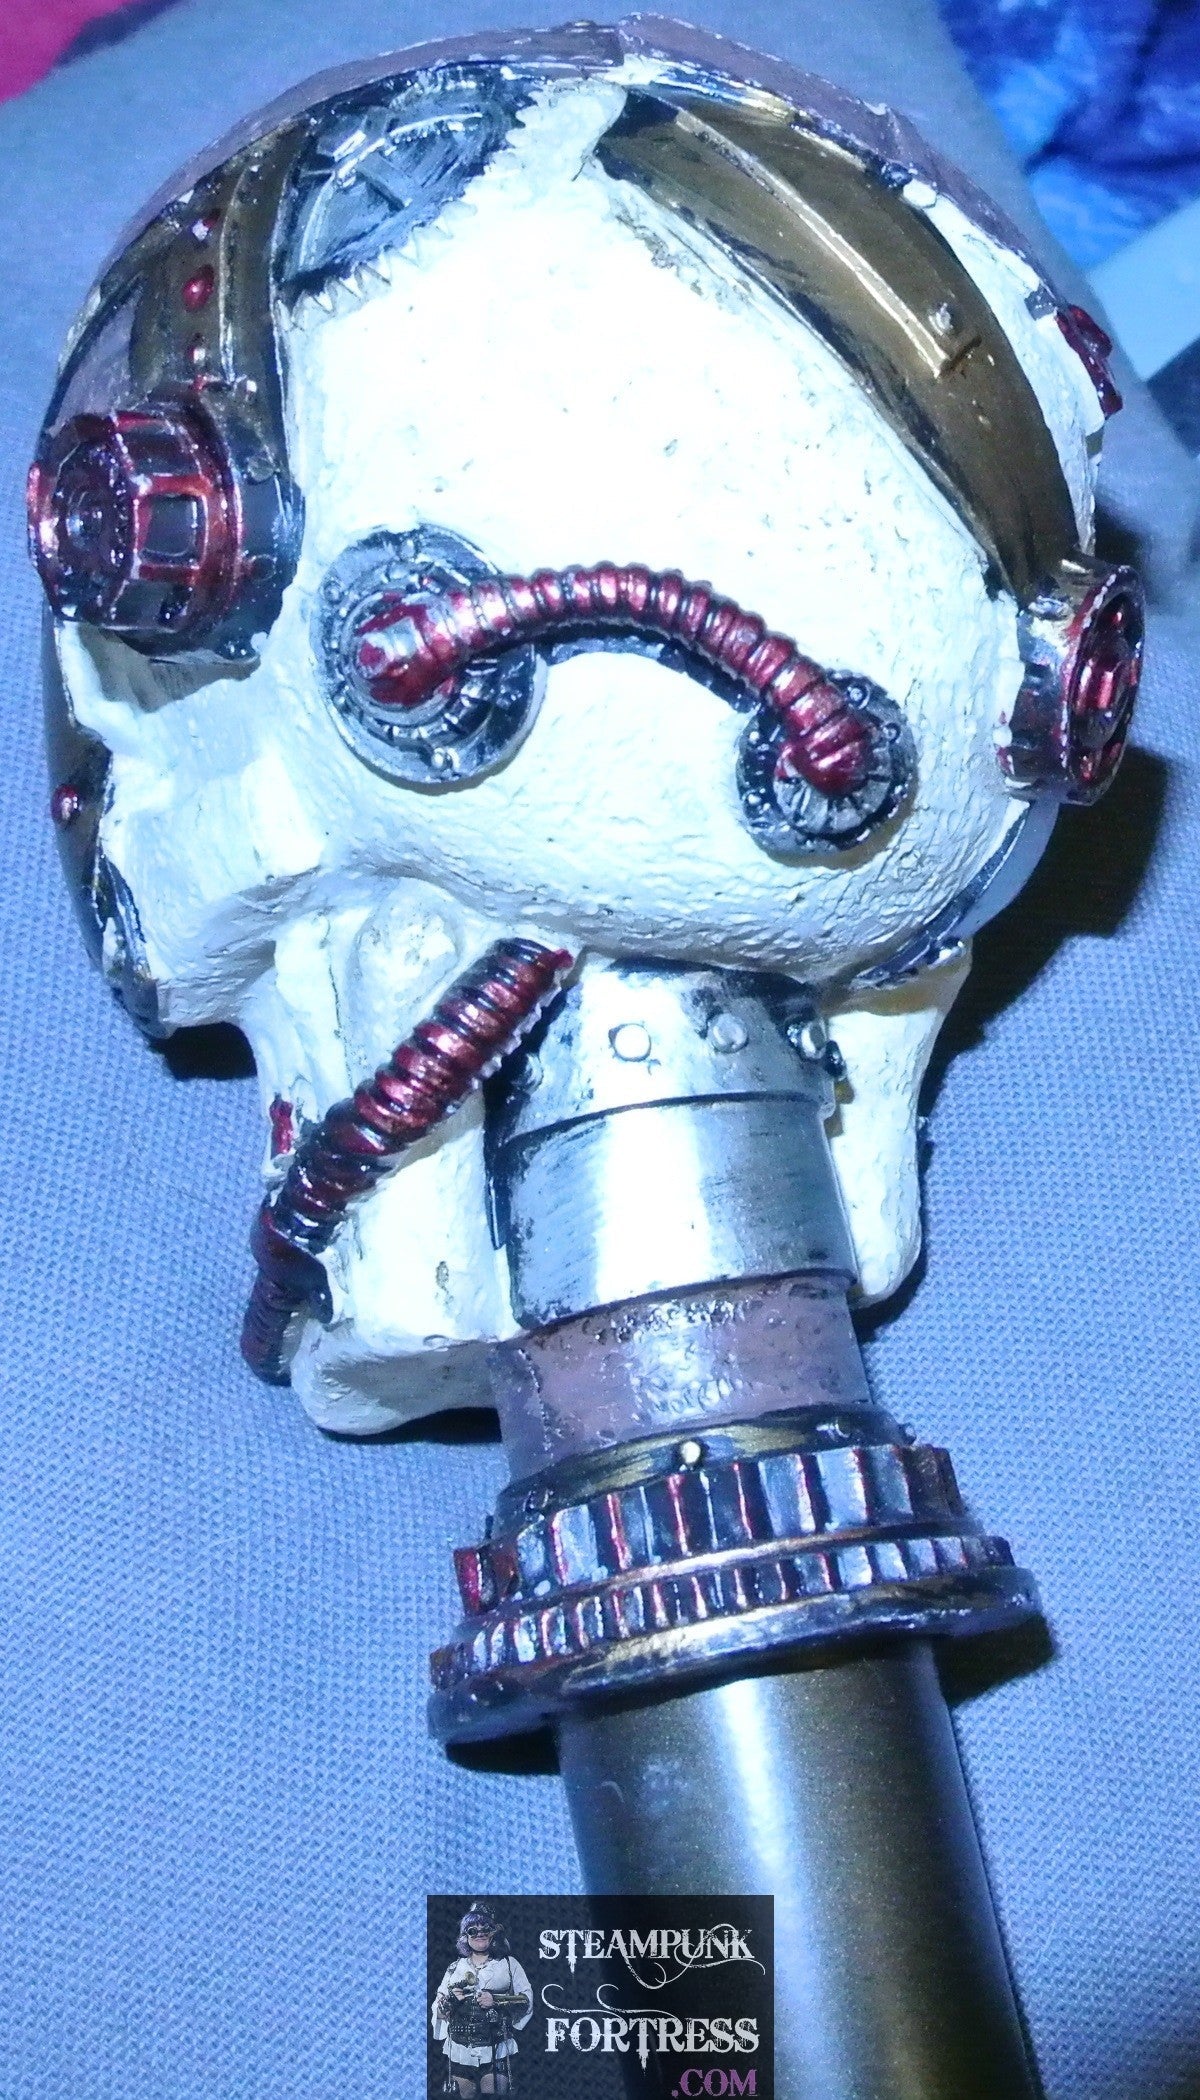 BROWN CERAMIC SKULL MONOCLE SKULL SKELETON STEAMPUNK METAL CANE **DISCONTINUED** MASS PRODUCED DUPLICATE